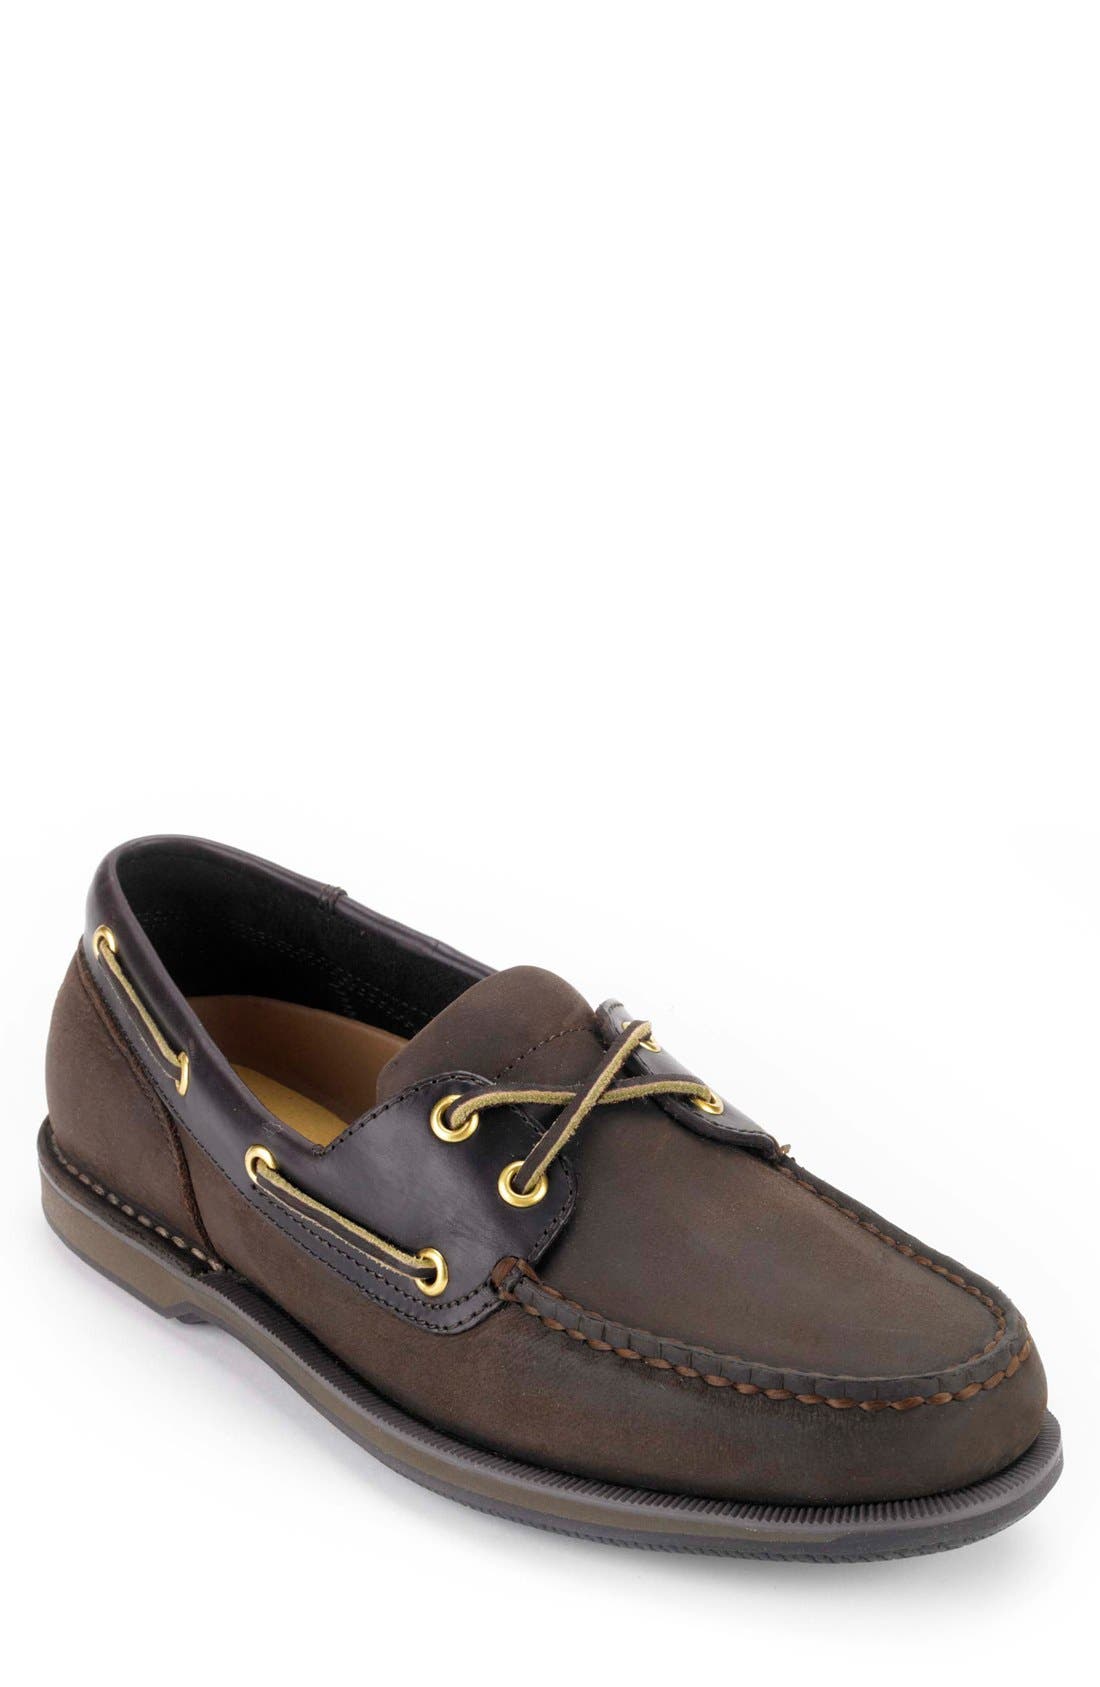 Chaussures Bateau Homme Rockport Perth Ports of Call Boat Shoe 